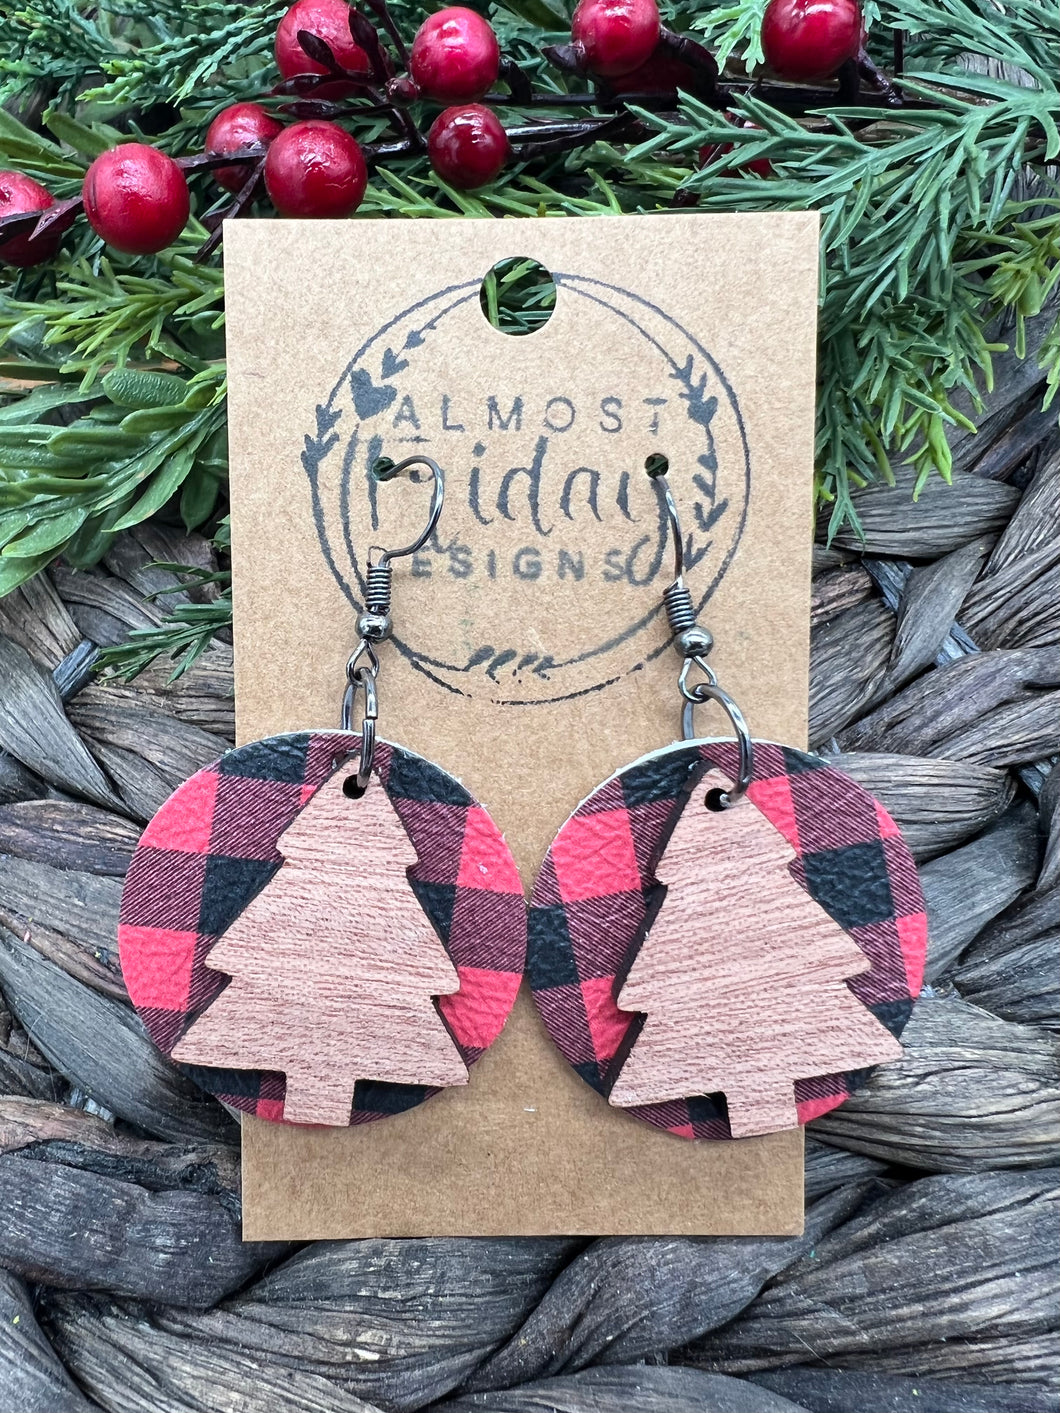 Wood Earrings - Genuine Leather - Christmas Tree - Round - Sapele - Buffalo Check - Christmas Earrings - Statement Earrings - Black and Red